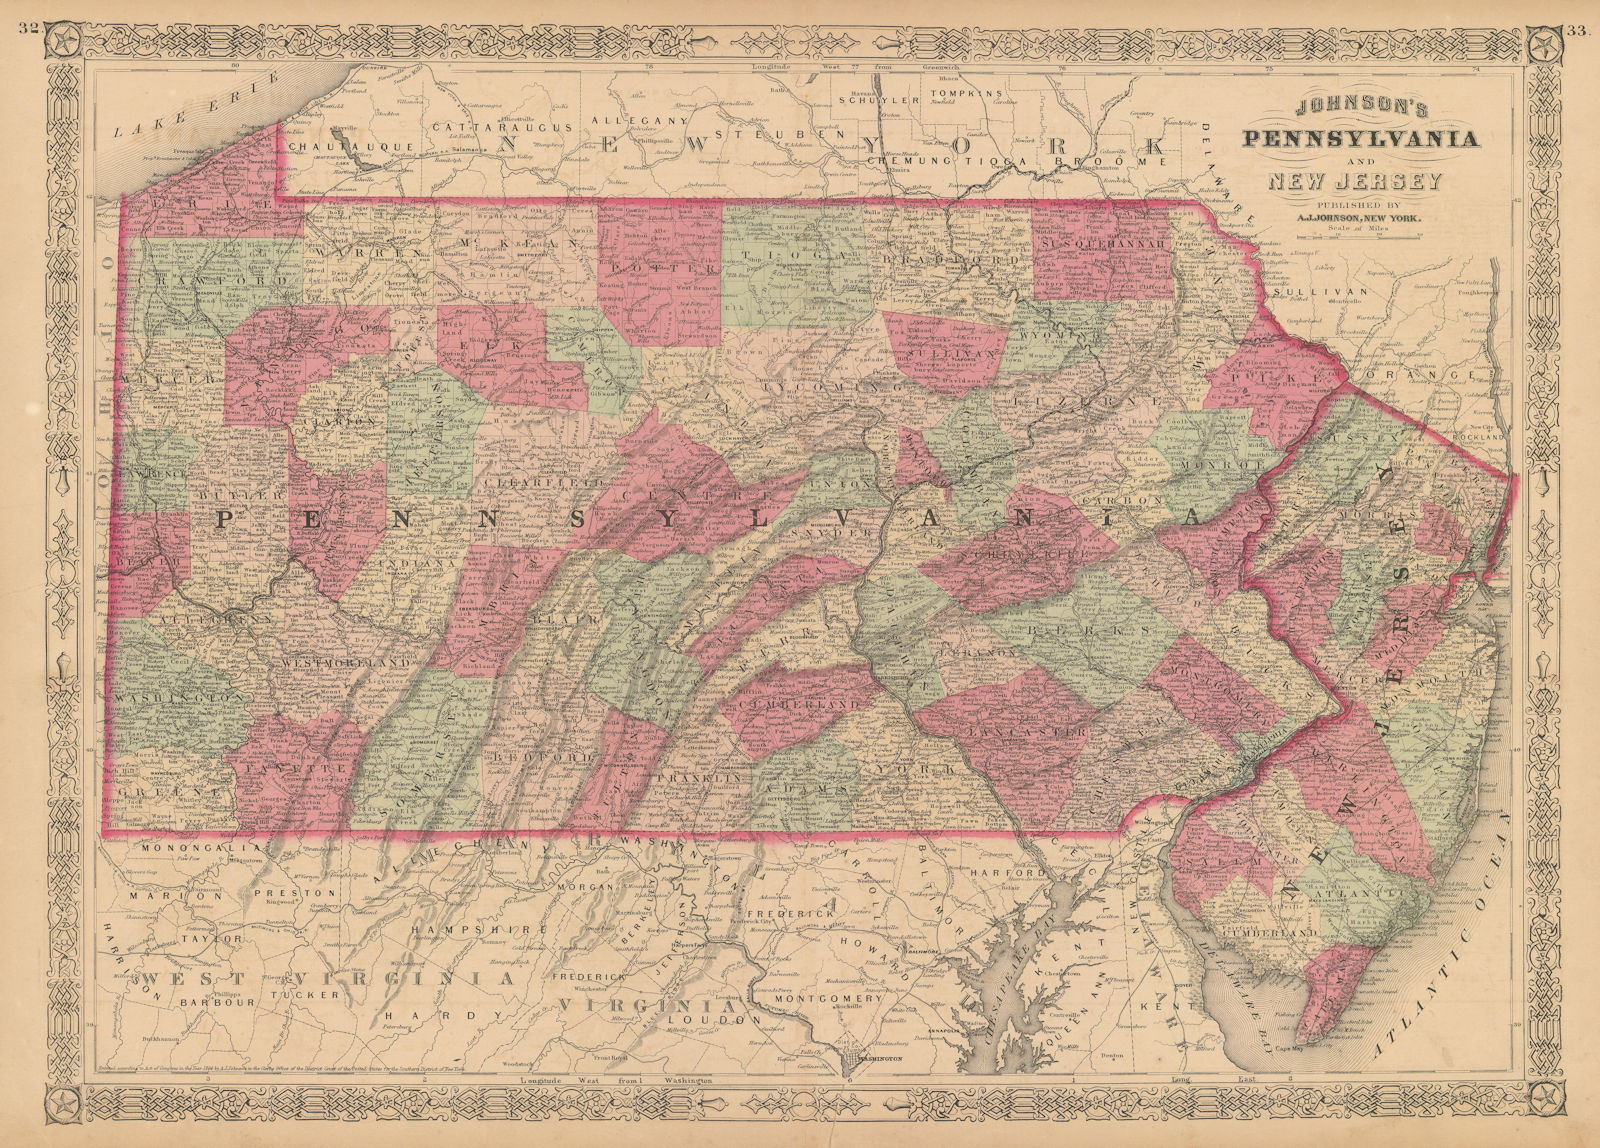 Associate Product Johnson's Pennsylvania and New Jersey. US state map showing counties 1867